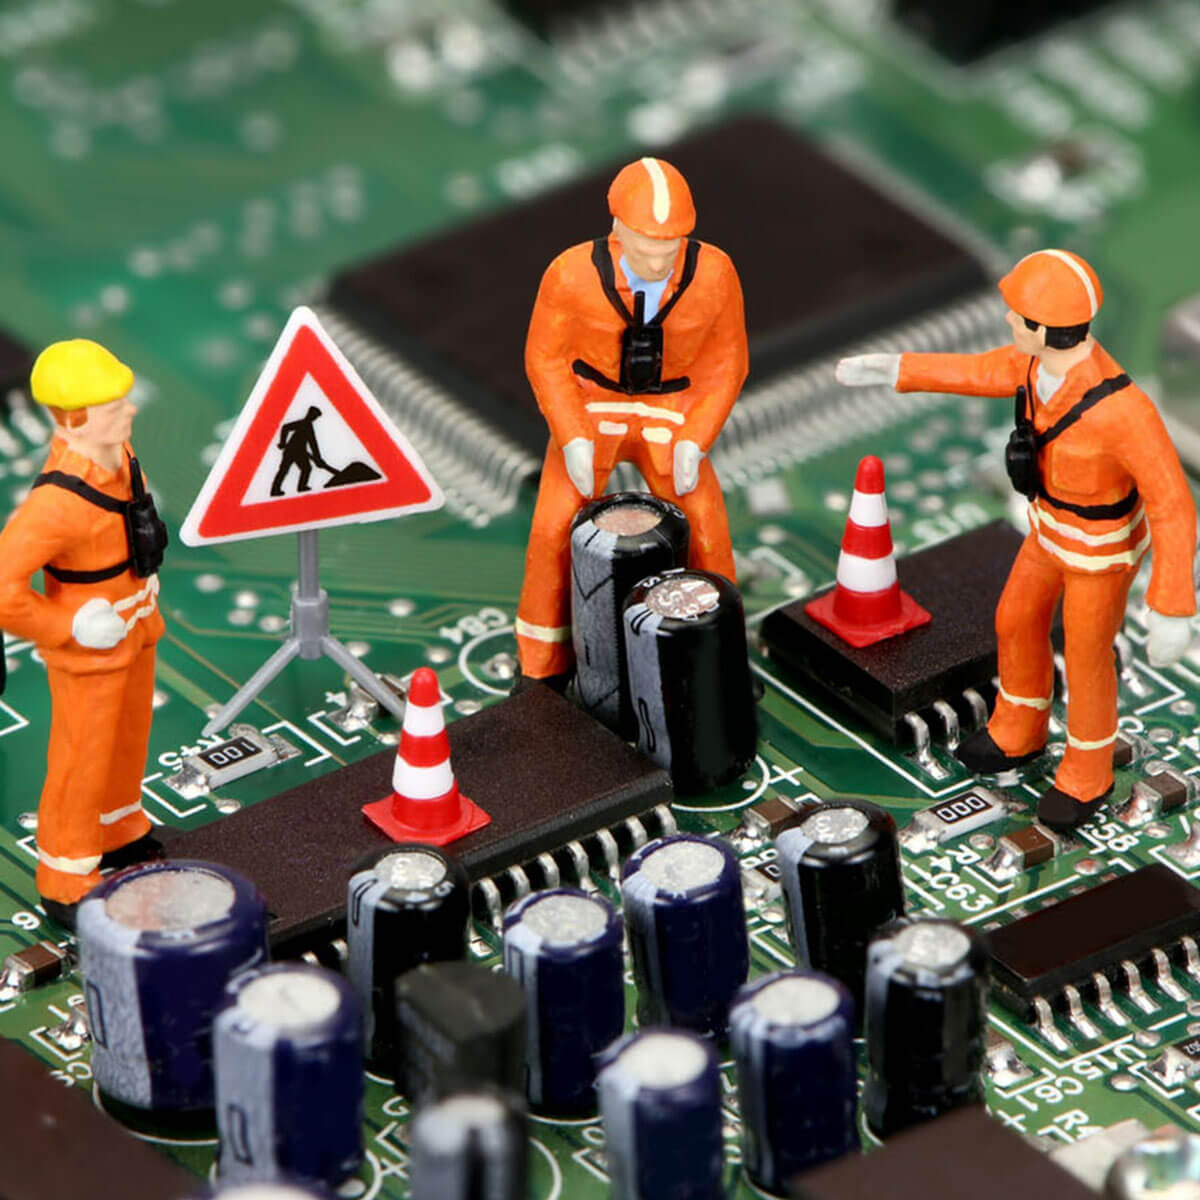 desktop repair service provides fast and reliable solutions